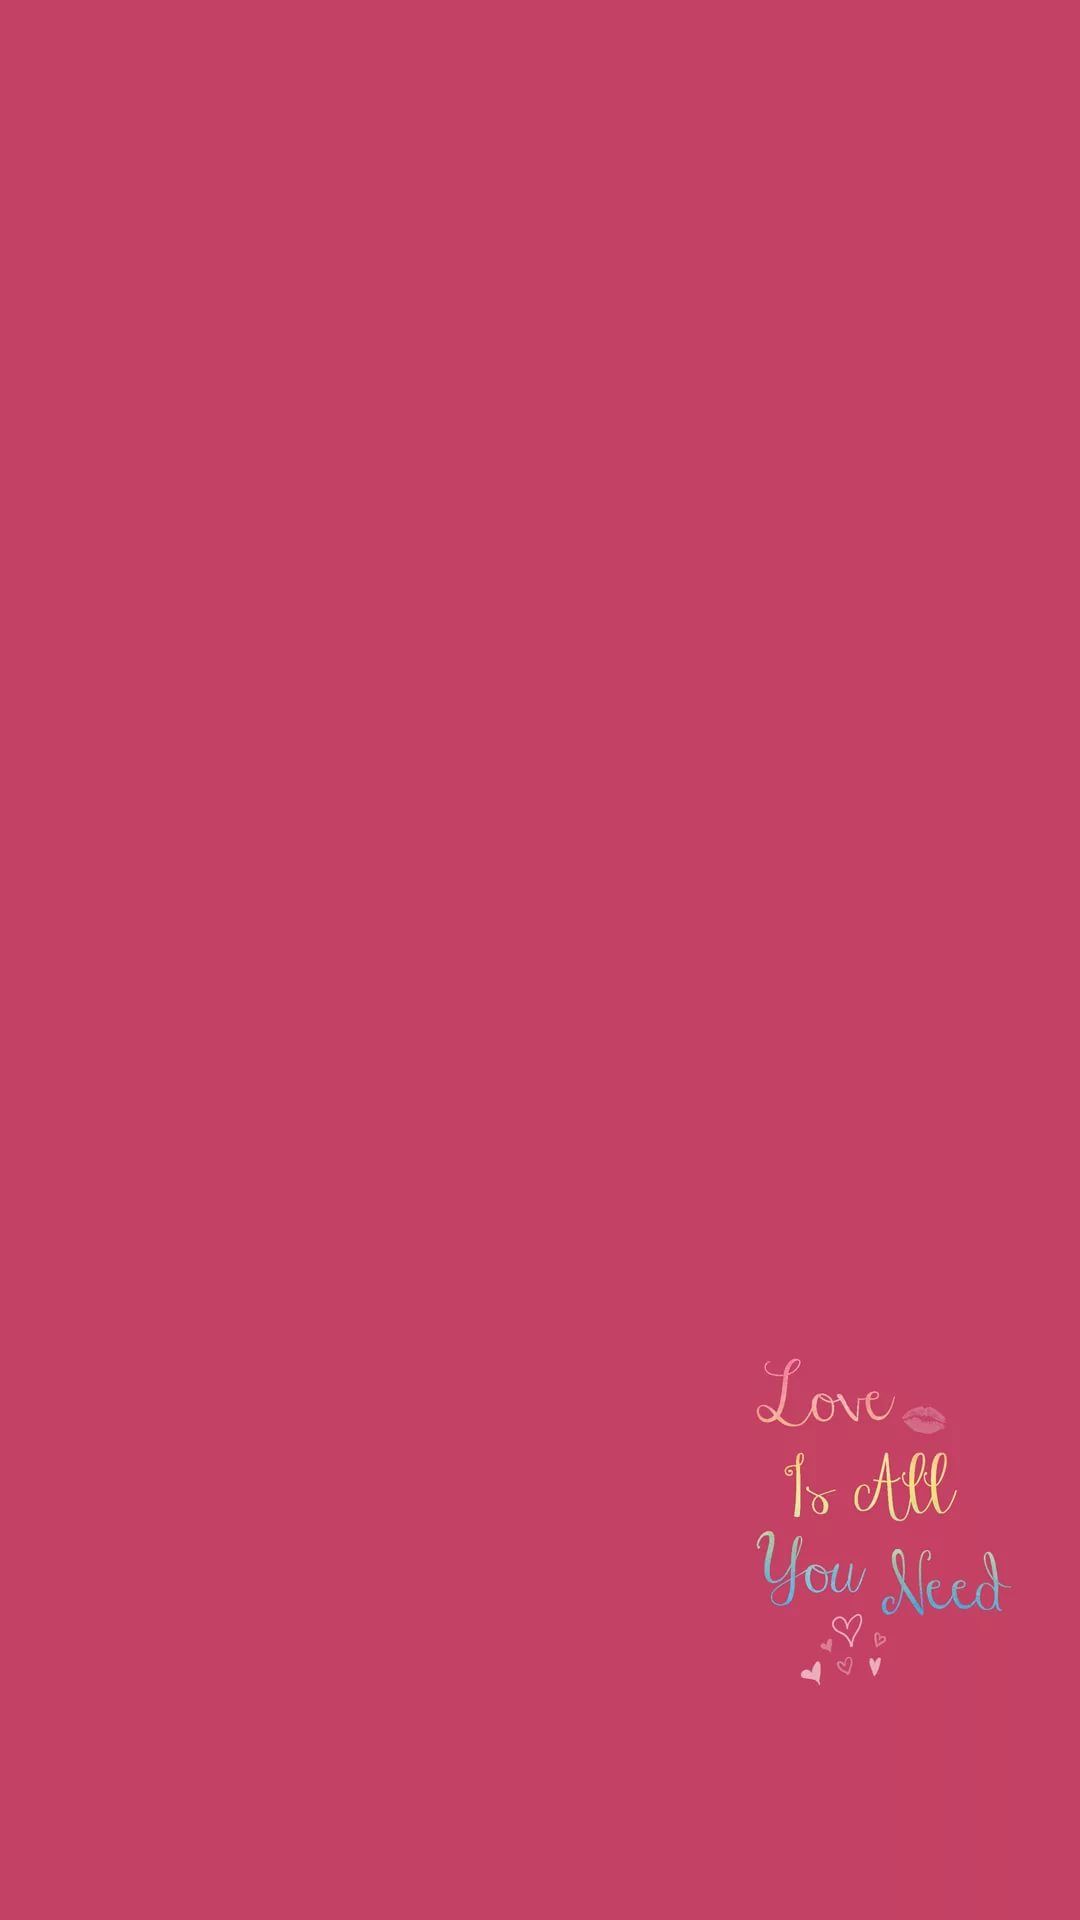 Solid Pink iPhone 6 wallpaper